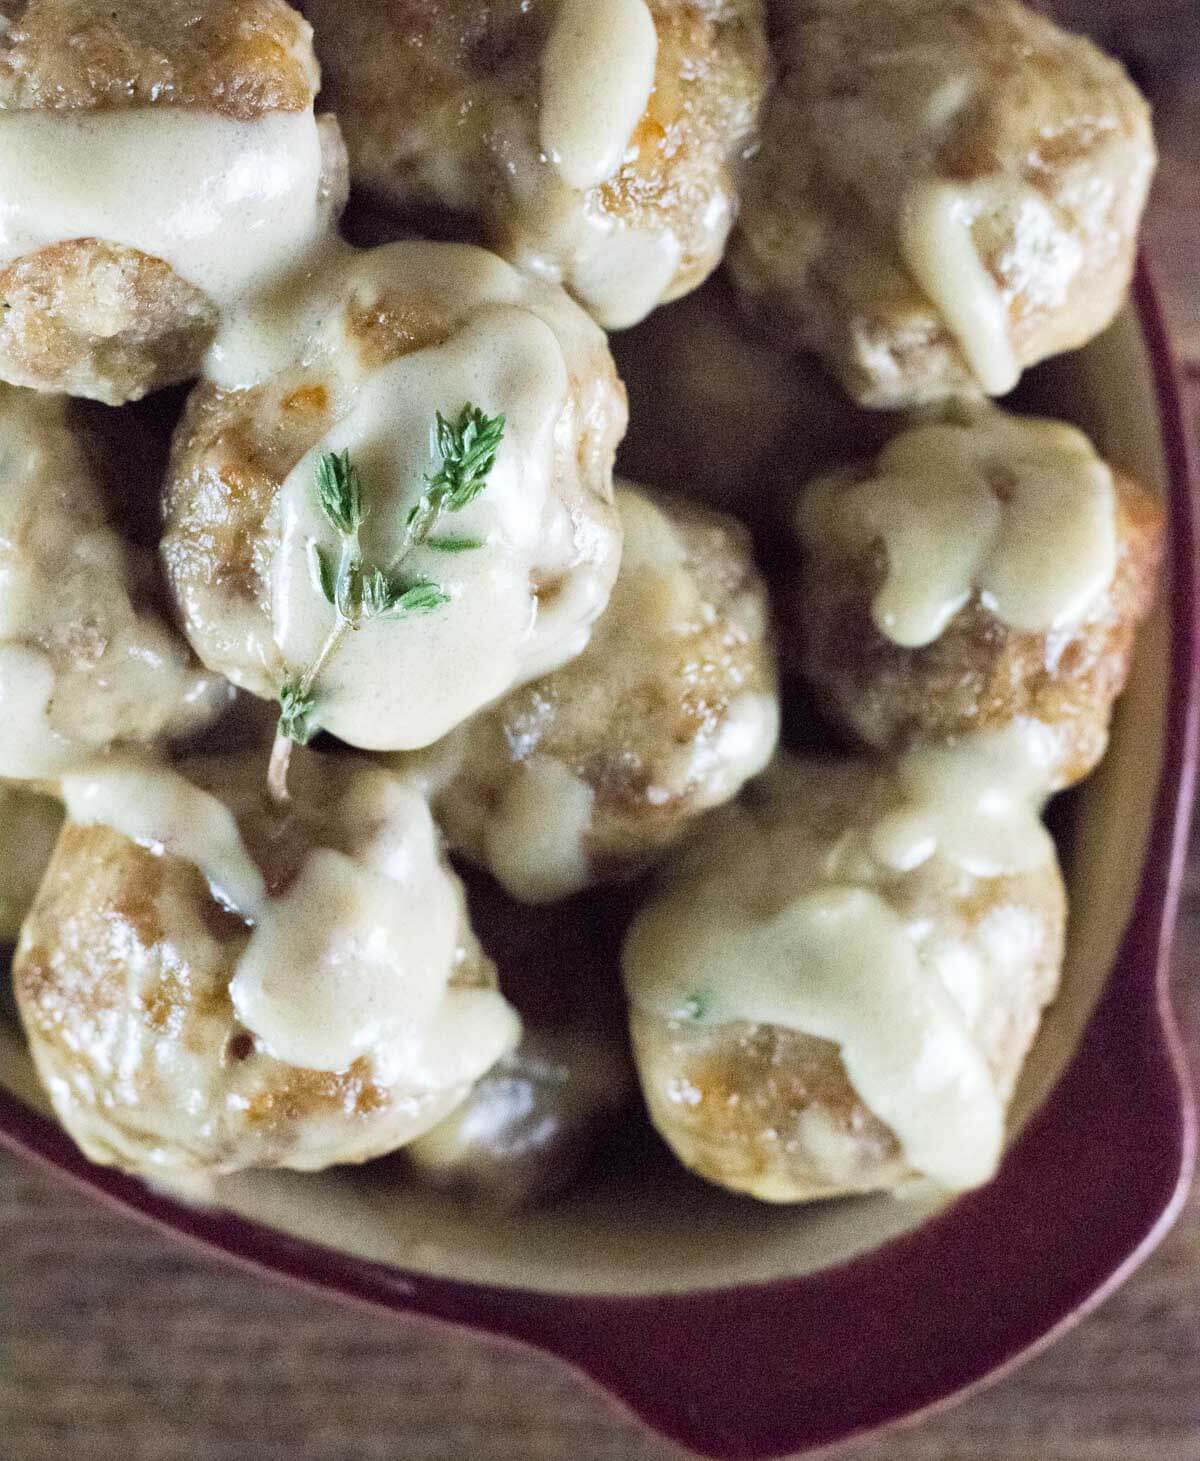 Meatballs in dish with gravy topped with thyme.